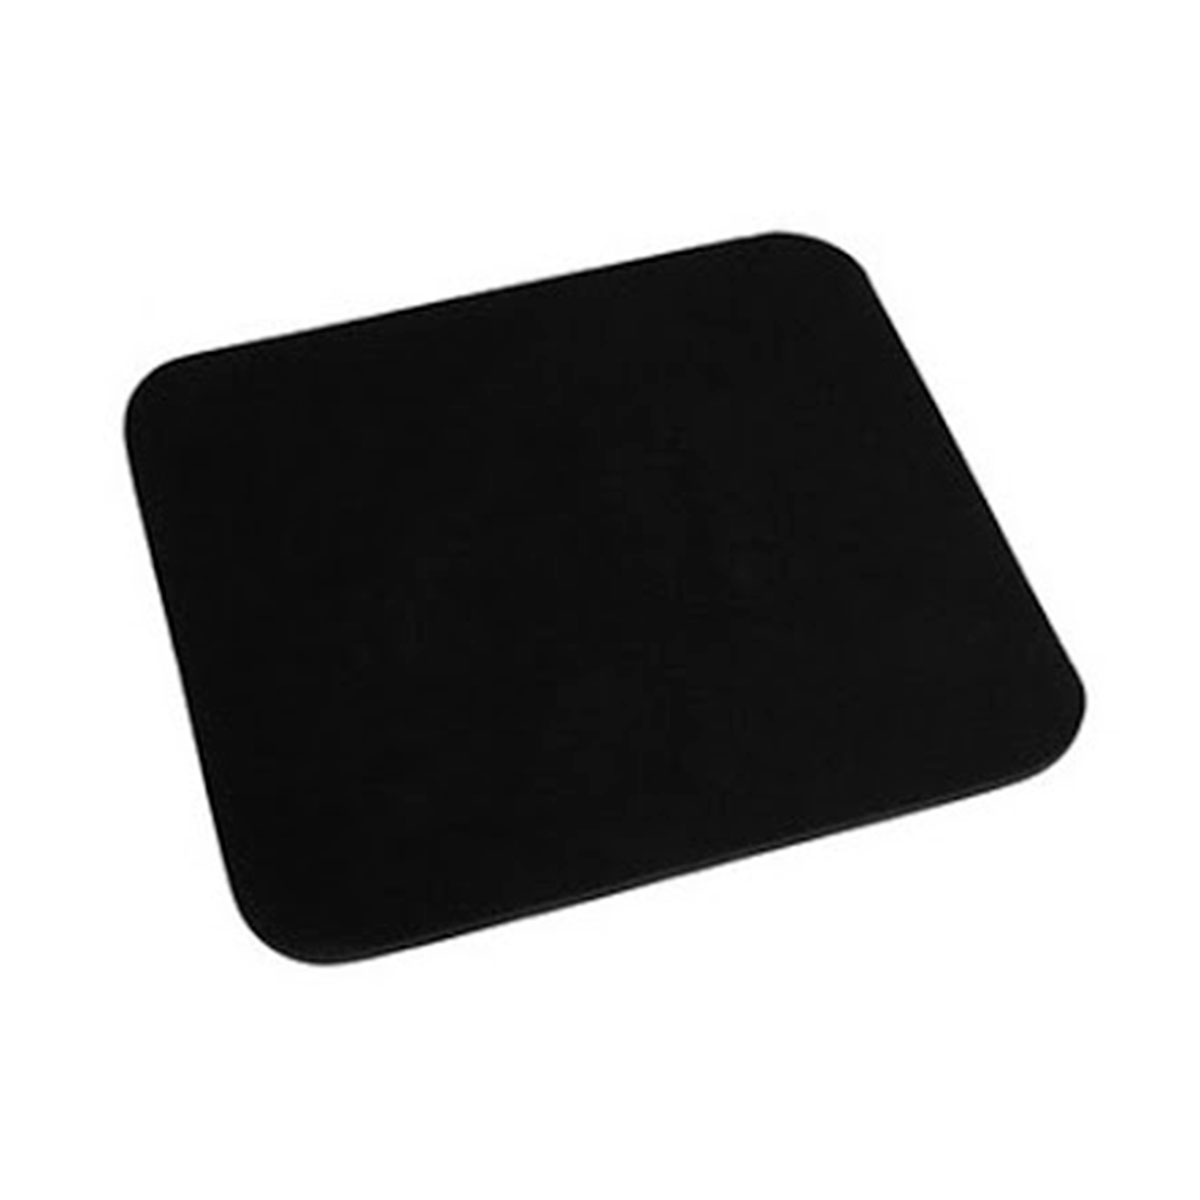 1456 BKT                                                          | MOUSE PAD LISO NEGRO                                                                                                                                                                                                                            